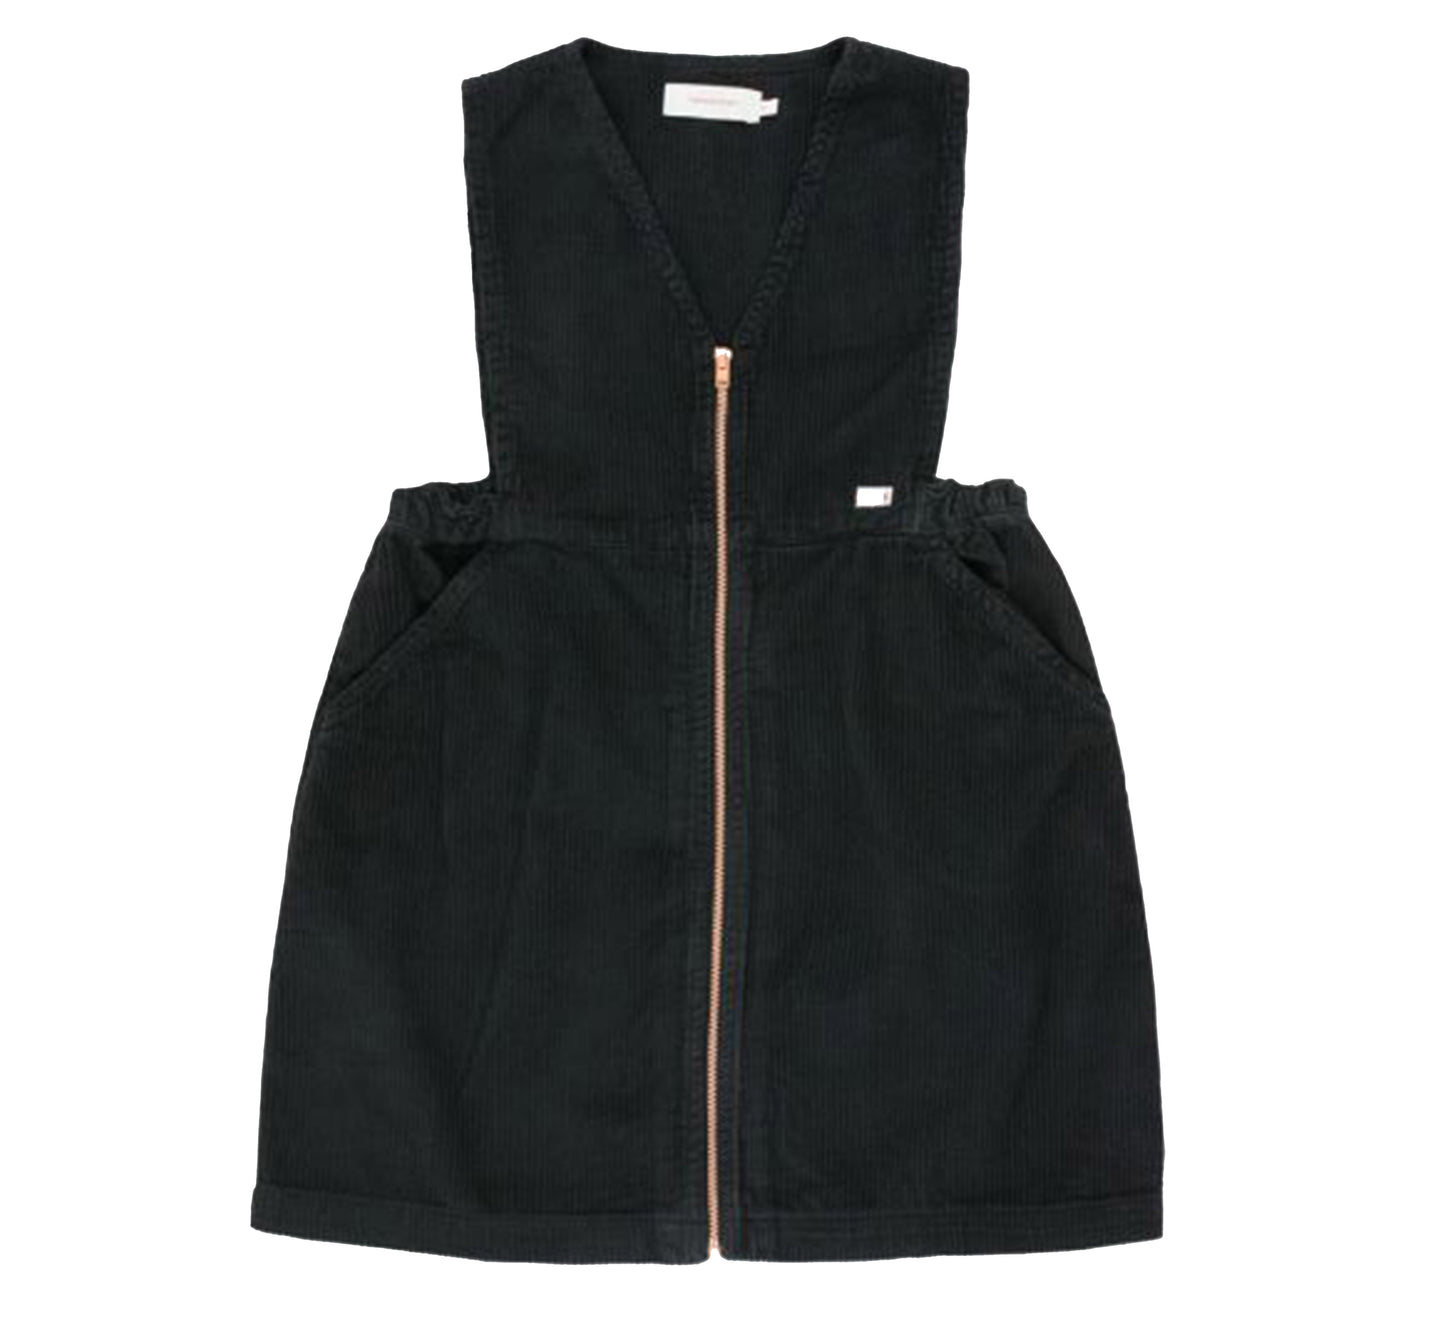 [4y] TINYCOTTONS V-Neck Dress in Black